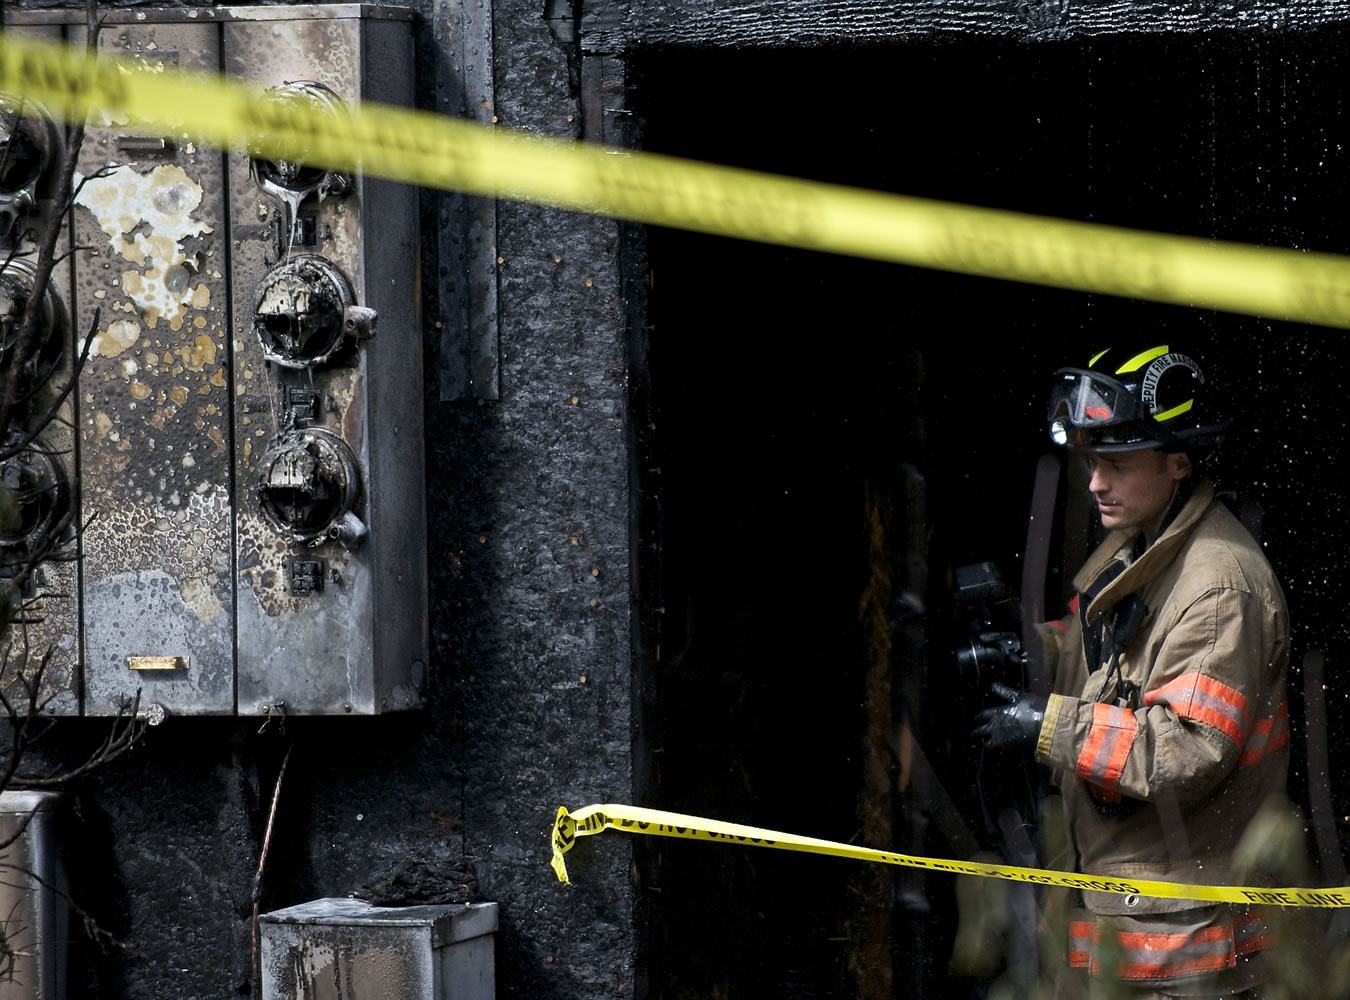 Fire officials said that a fatal fire at Vancouver's Sunpointe Apartments was unintentional and was caused by either smoking materials or electrical problems.